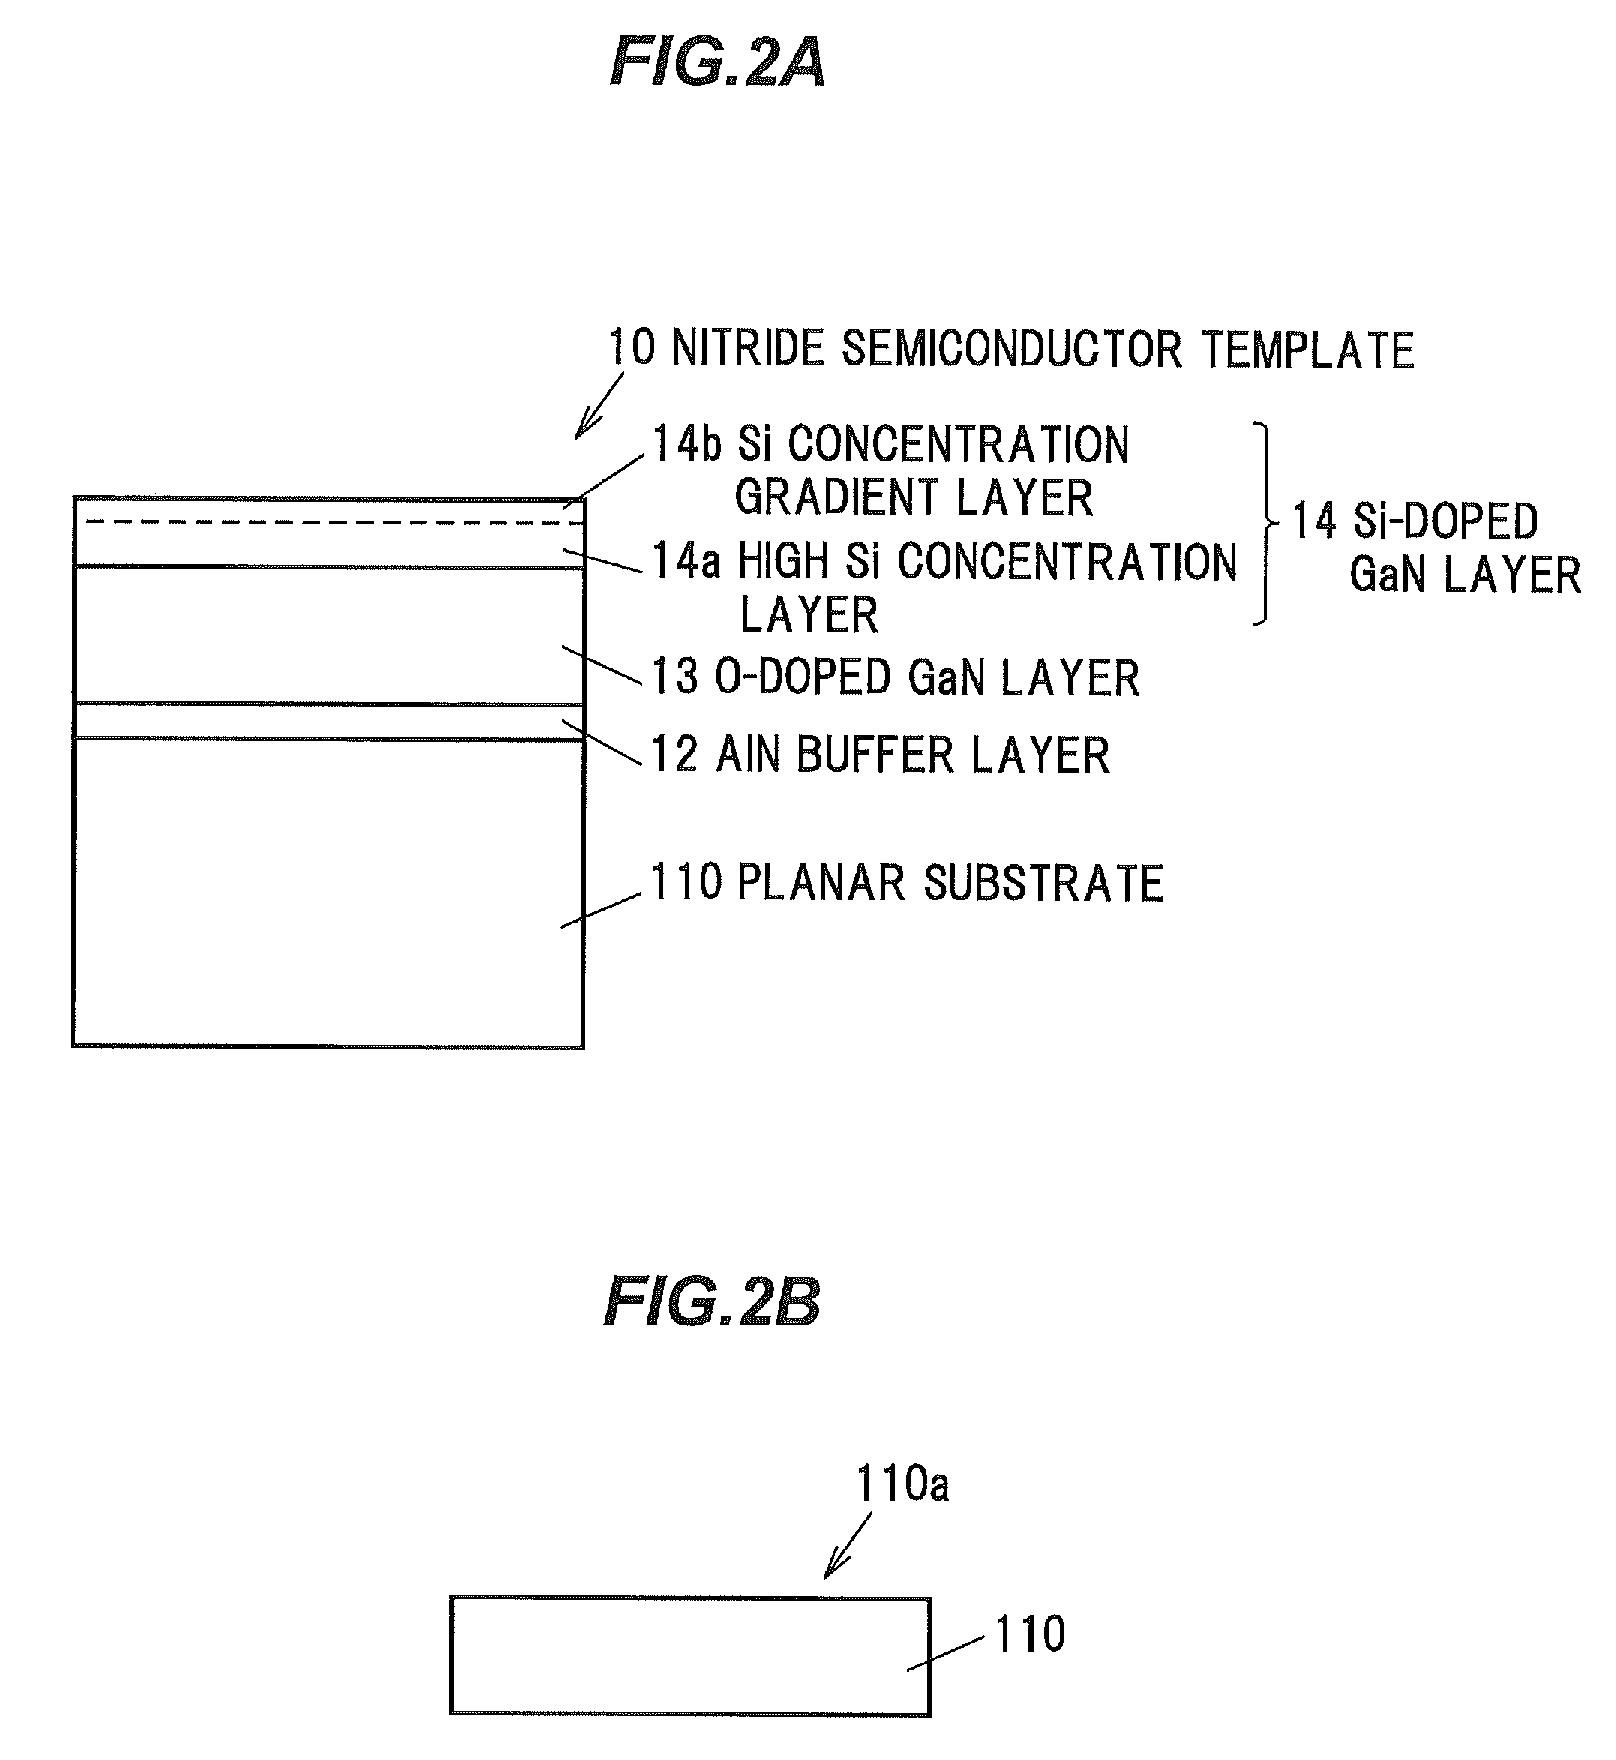 Nitride semiconductor template and light-emitting diode